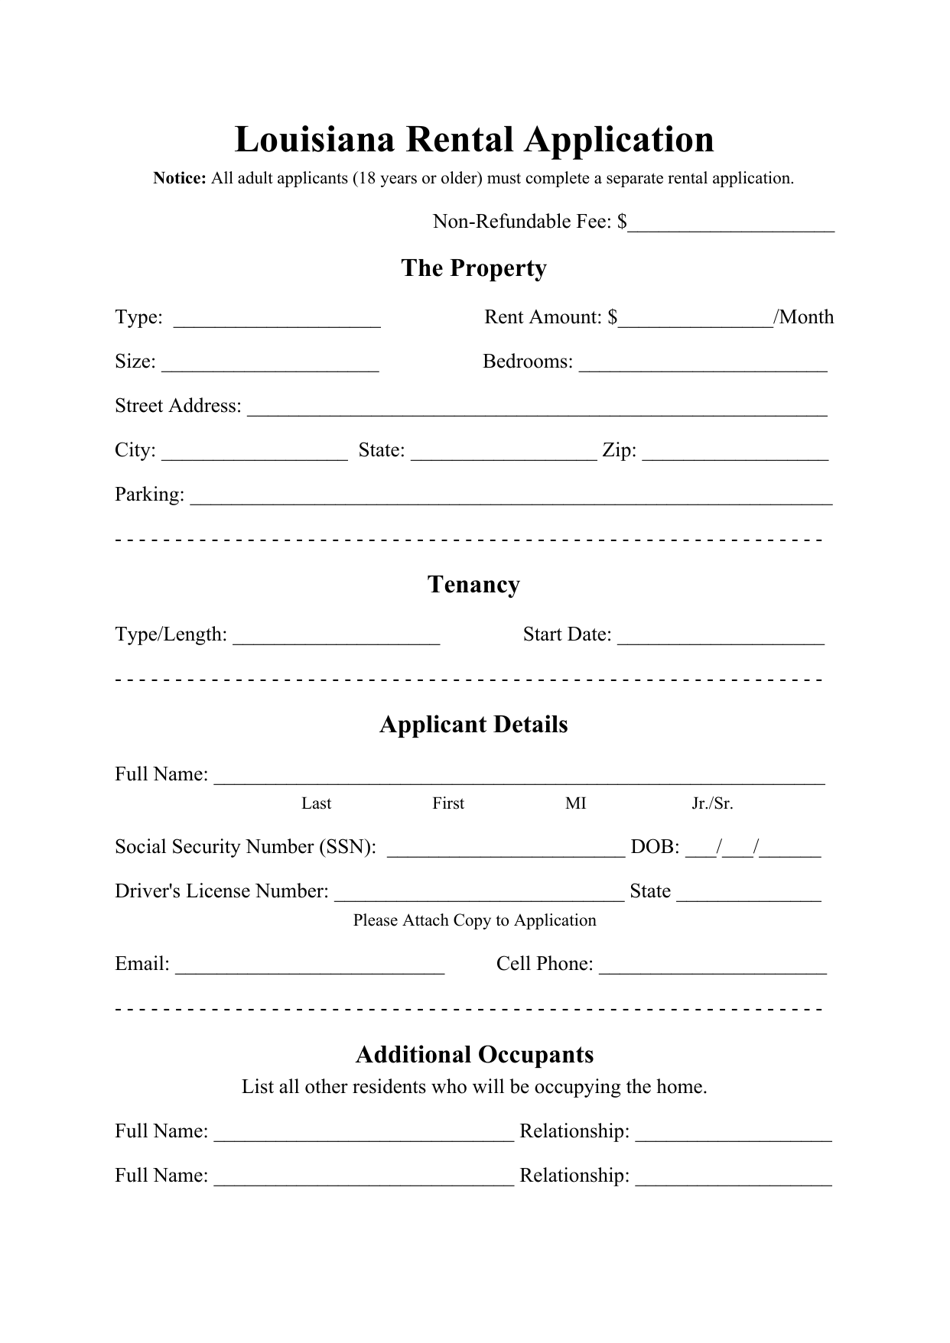 louisiana-rental-application-form-fill-out-sign-online-and-download